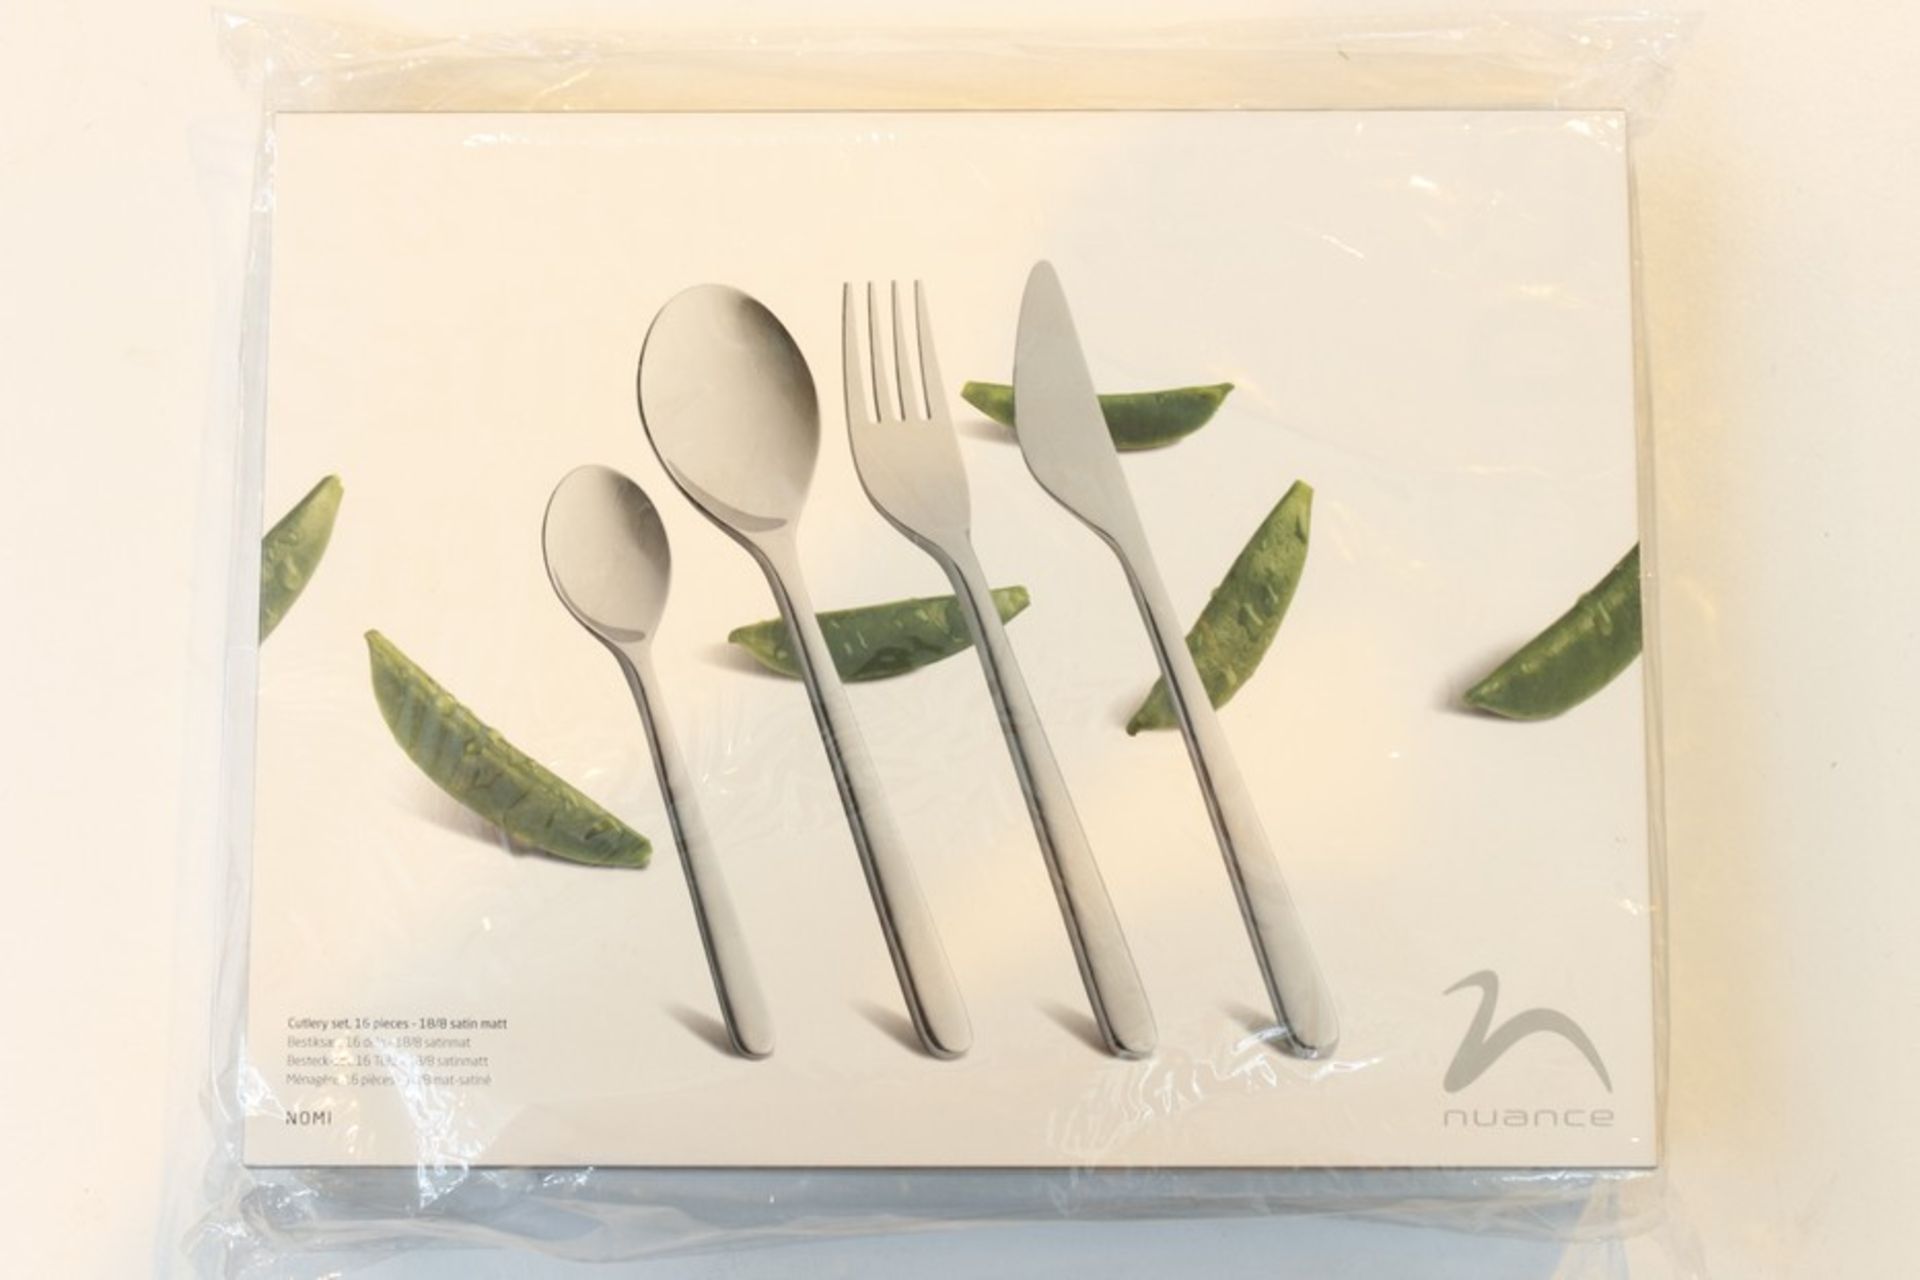 1 x BOXED NUANCE NOMI 16 PIECE SATIN CUTLERY SET RRP £160  *PLEASE NOTE THAT THE BID PRICE IS